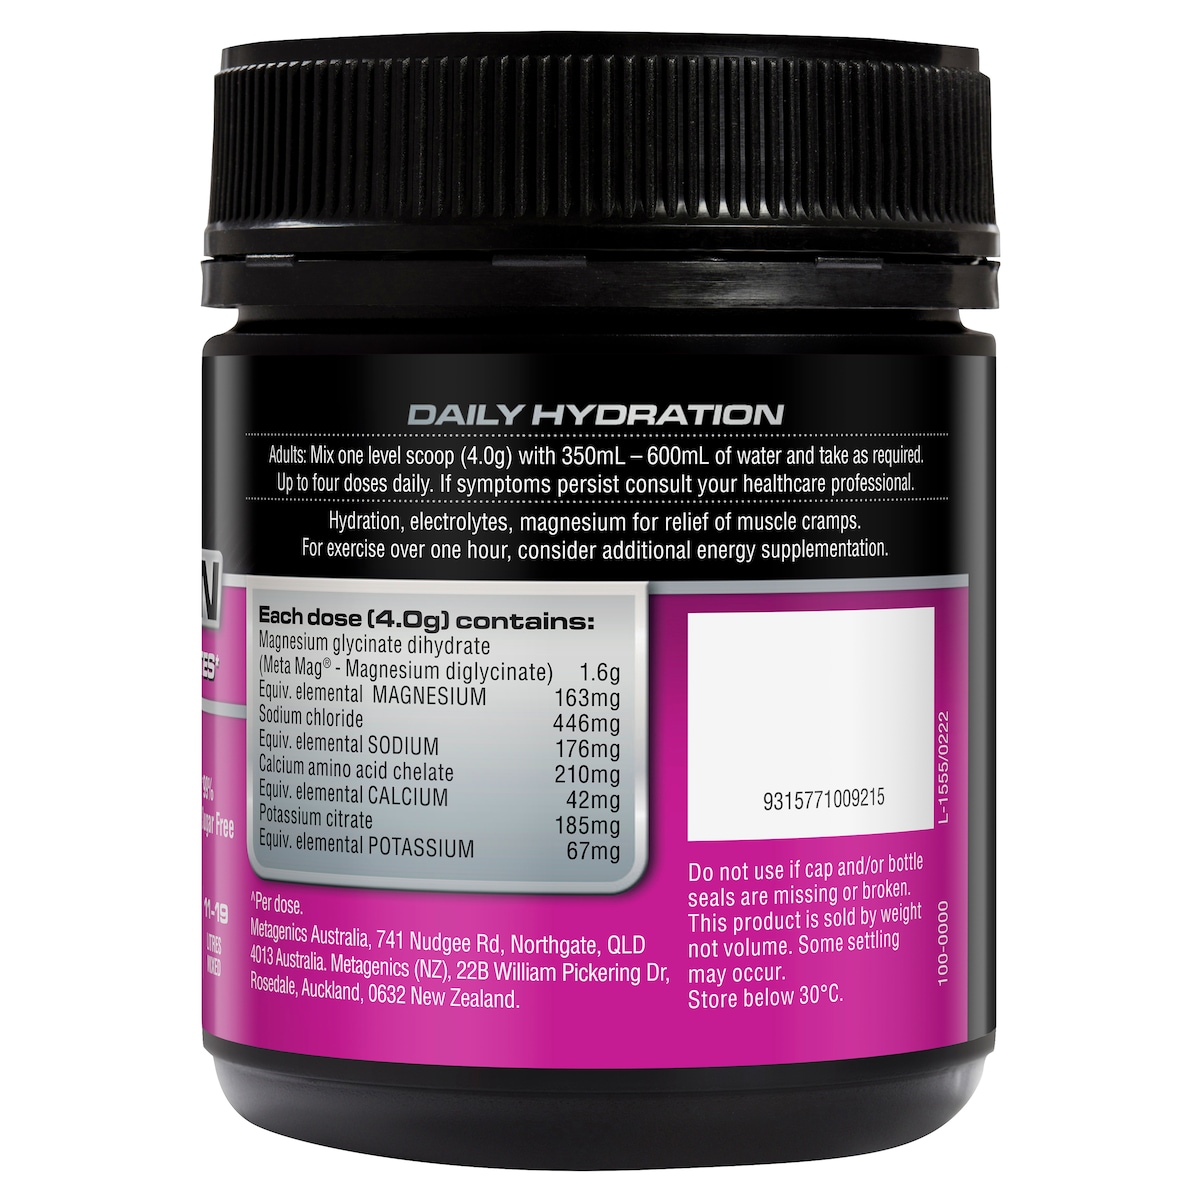 Endura Rehydration Low Carb Fuel Grapeberry 128G